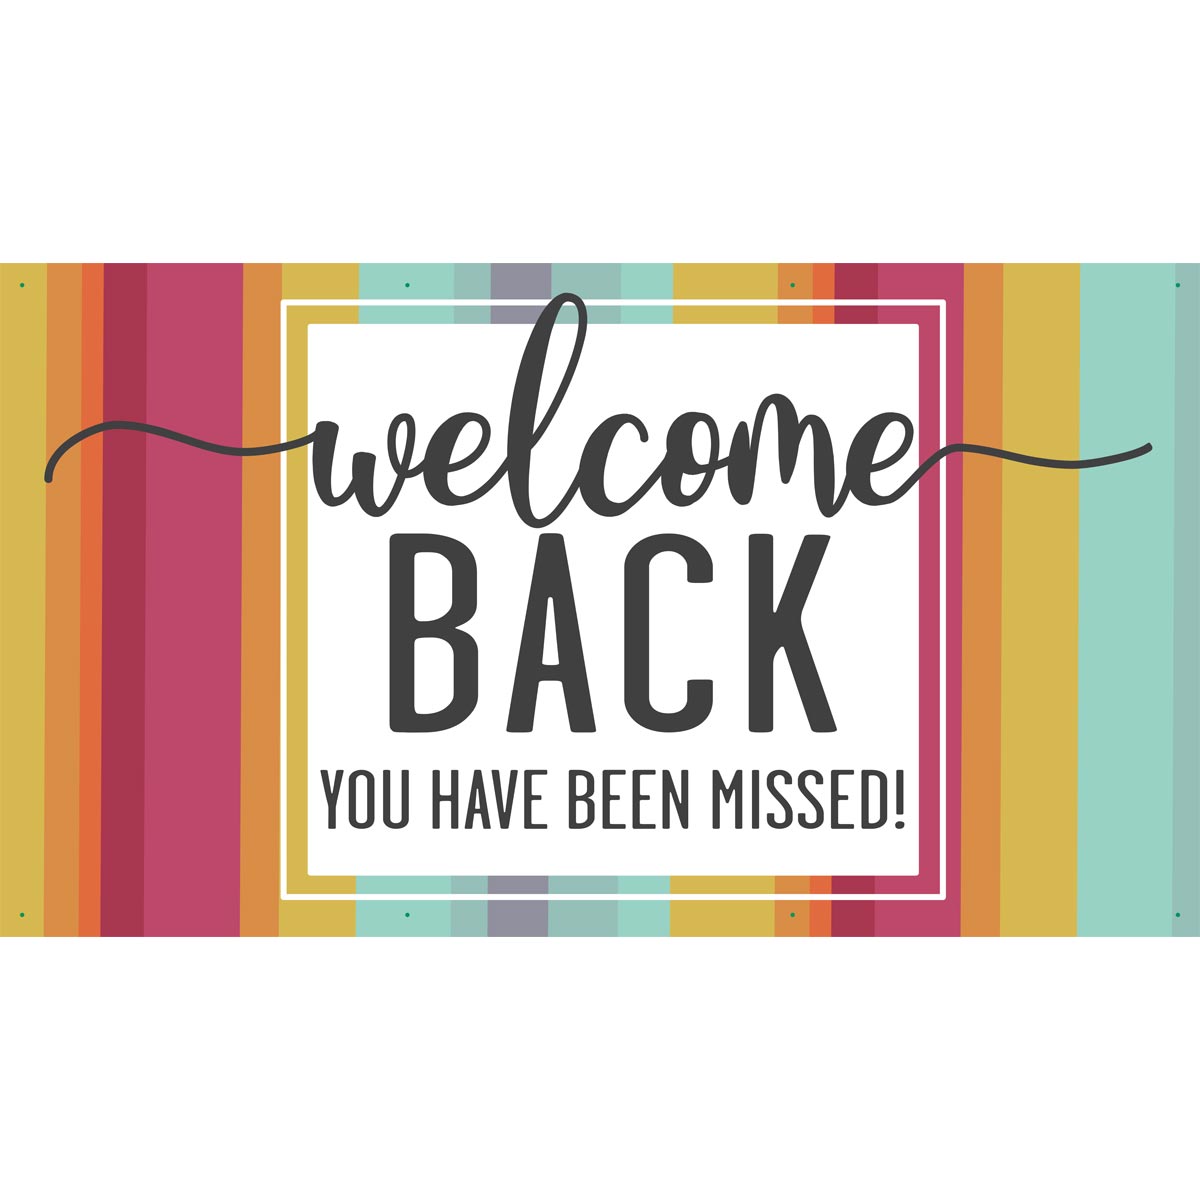 ban01cz6004-welcome-back-you-have-been-missed-banner-000